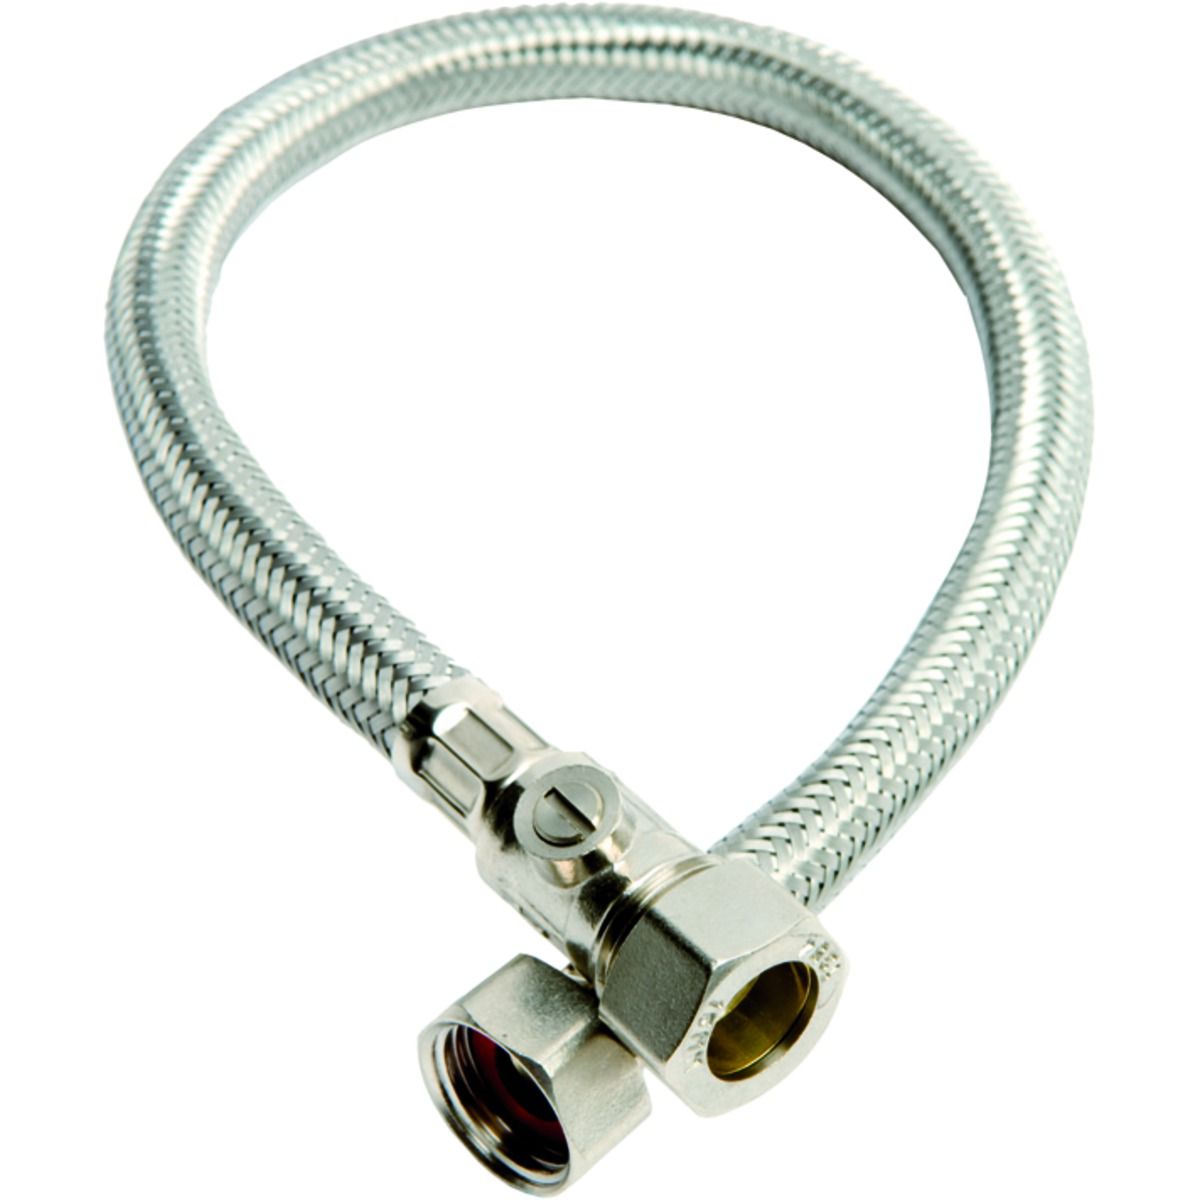 Image of Primaflow Flexible Compression Tap Connector With Isolating Valve - 15 X 12 X 500mm